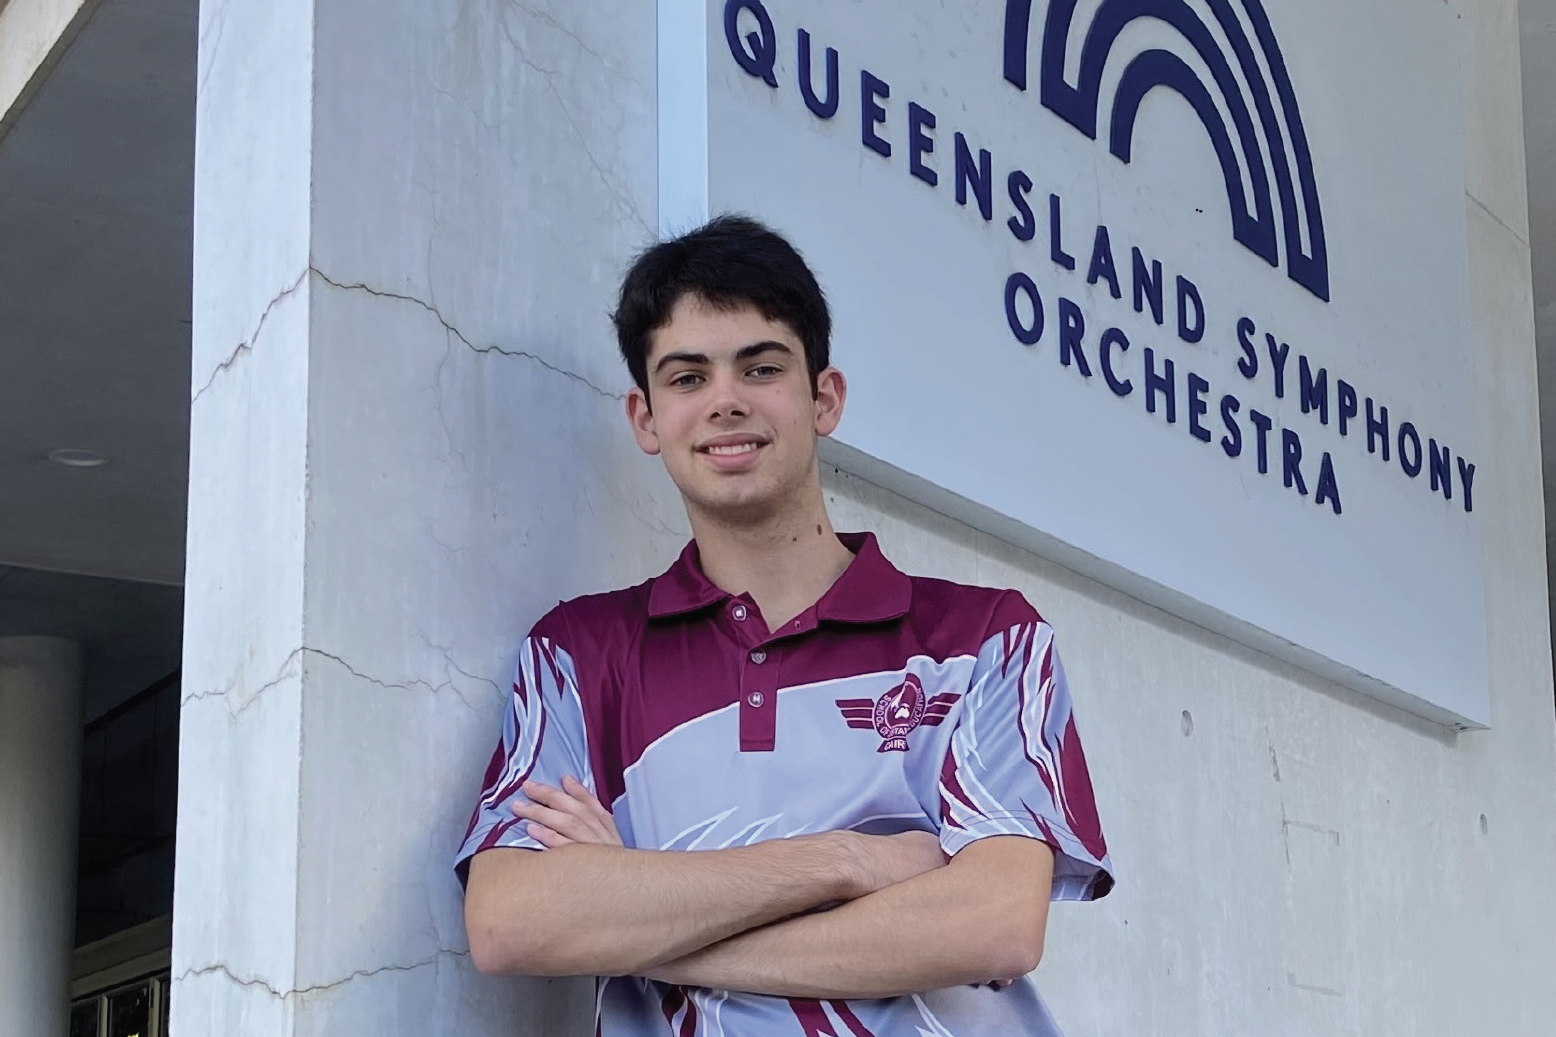 Local composer Jon Platz is expanding his knowledge through the Queensland Symphony Orchestra’s Compose Program.